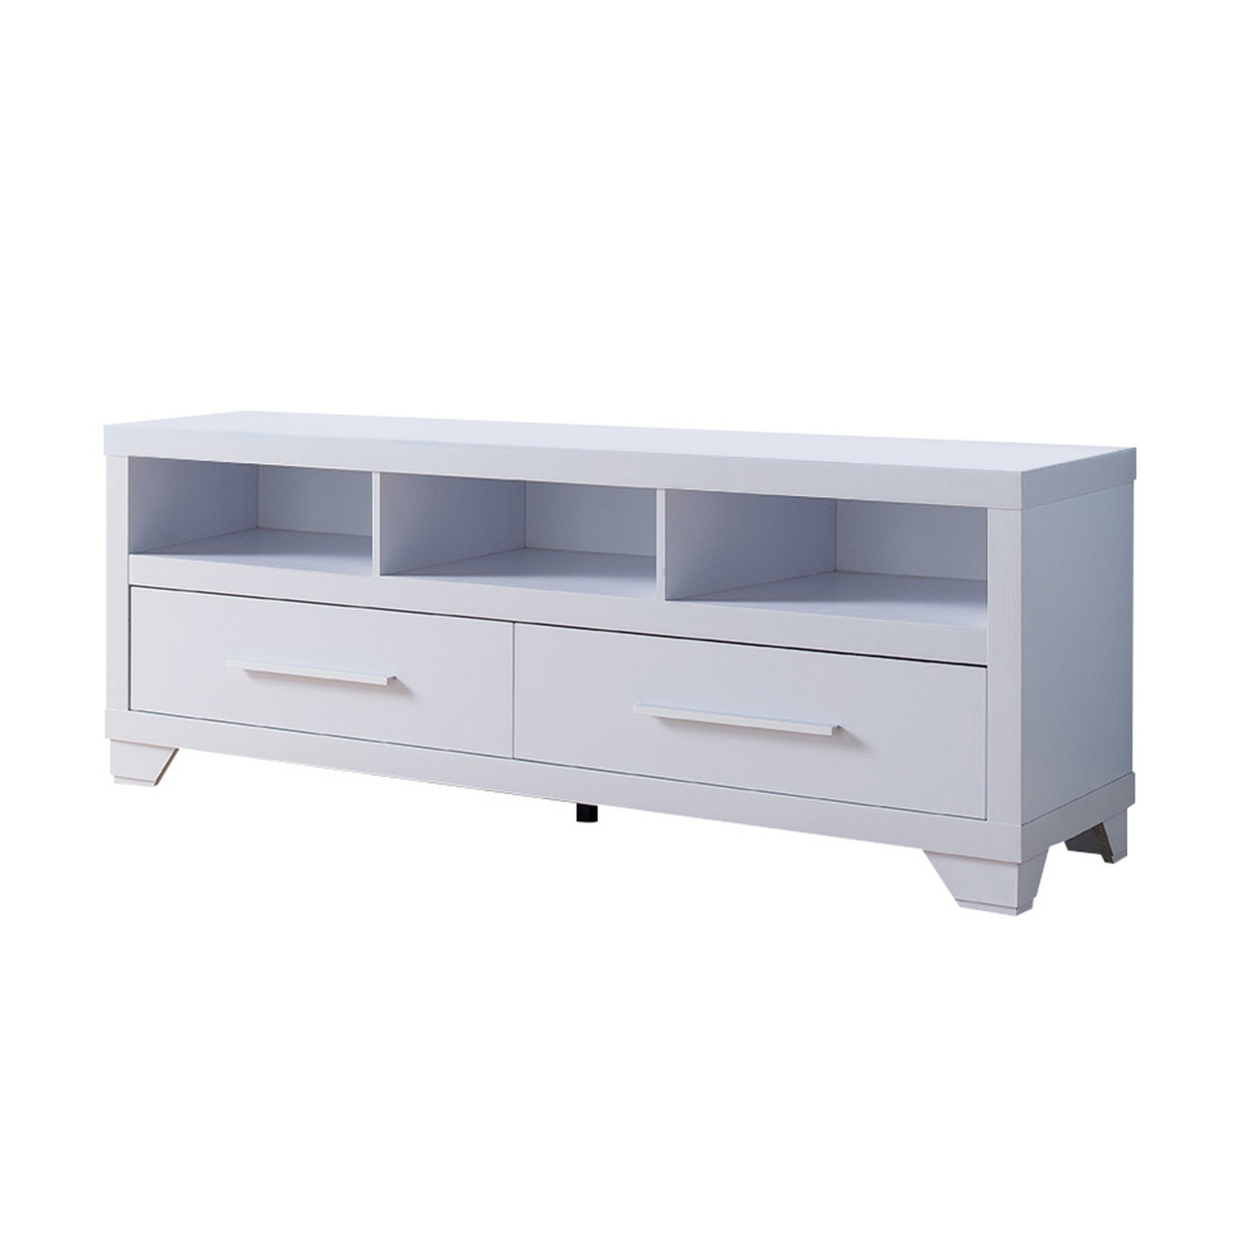 72 Inch Modern TV Entertainment Console With 2 Drawers And 3 Shelves, White- Saltoro Sherpi